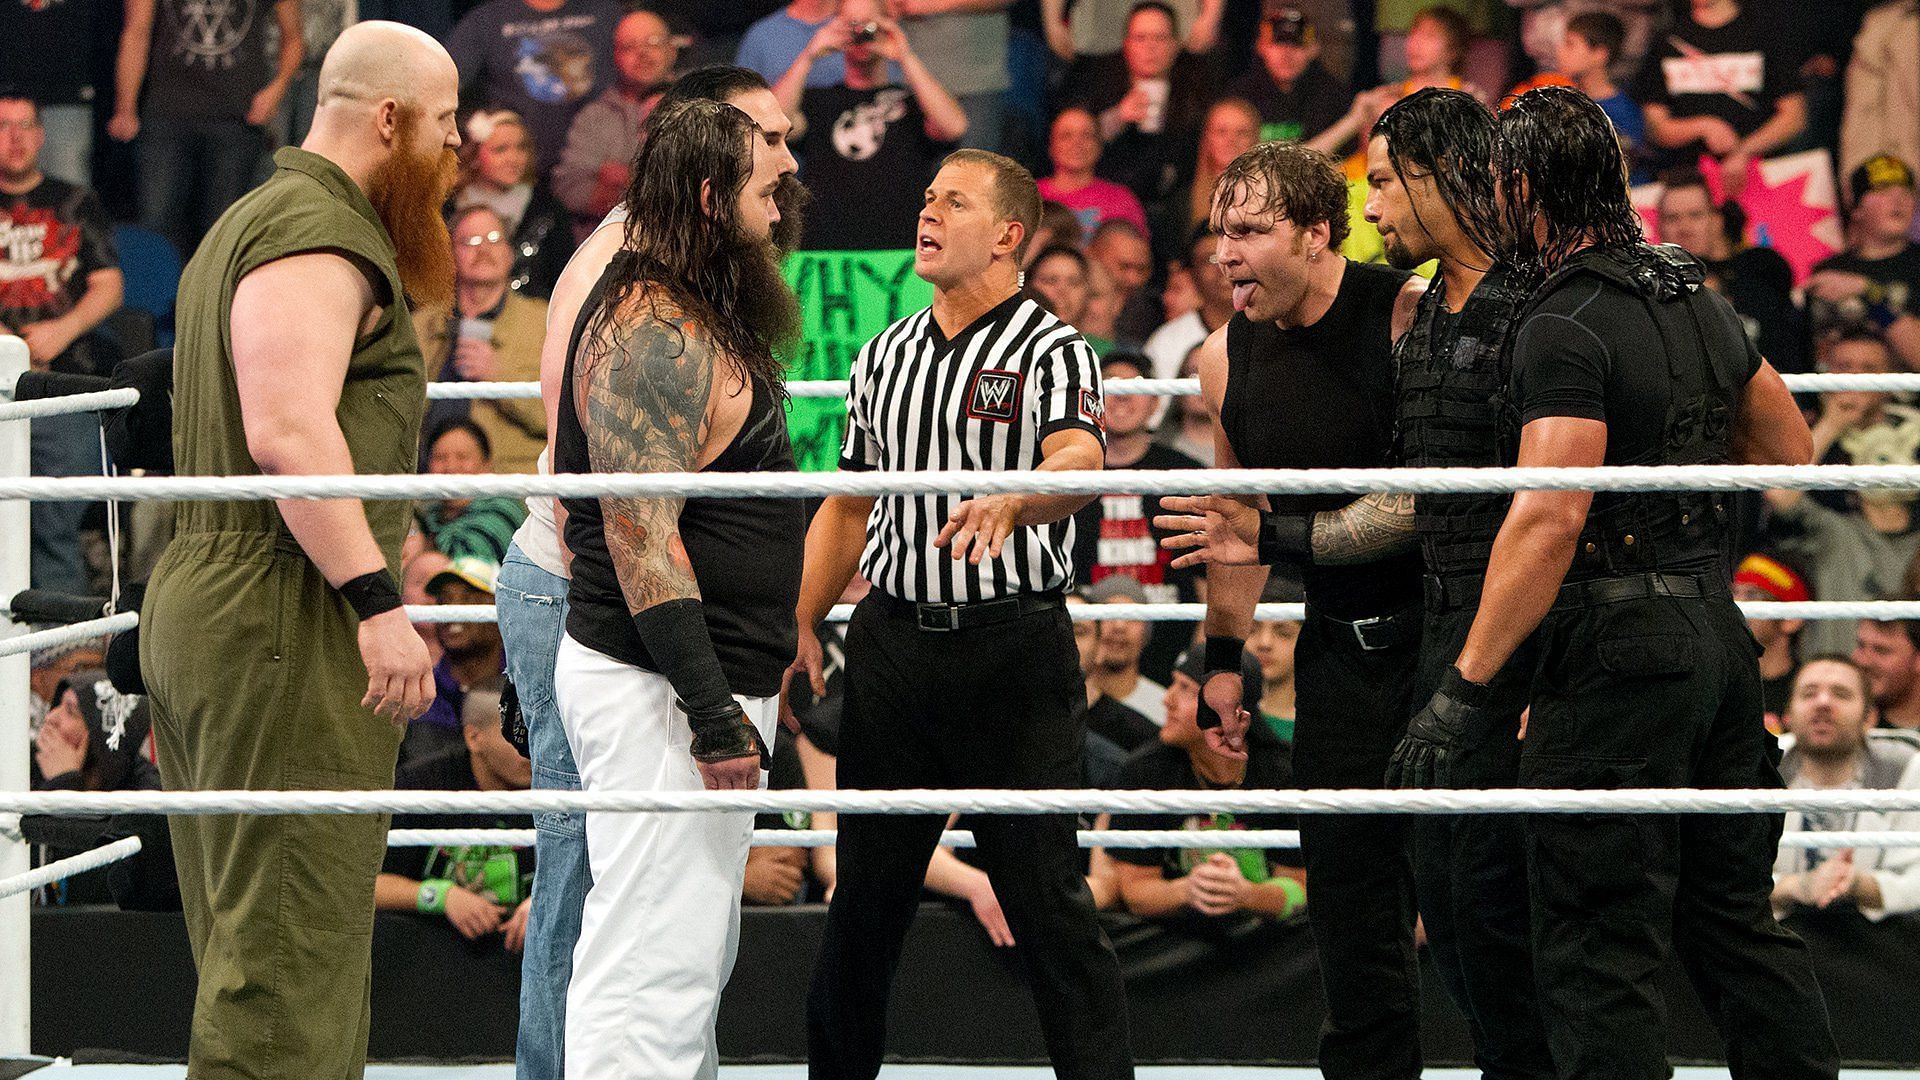 The Shield and The Wyatt Family fought each other in February 2014.